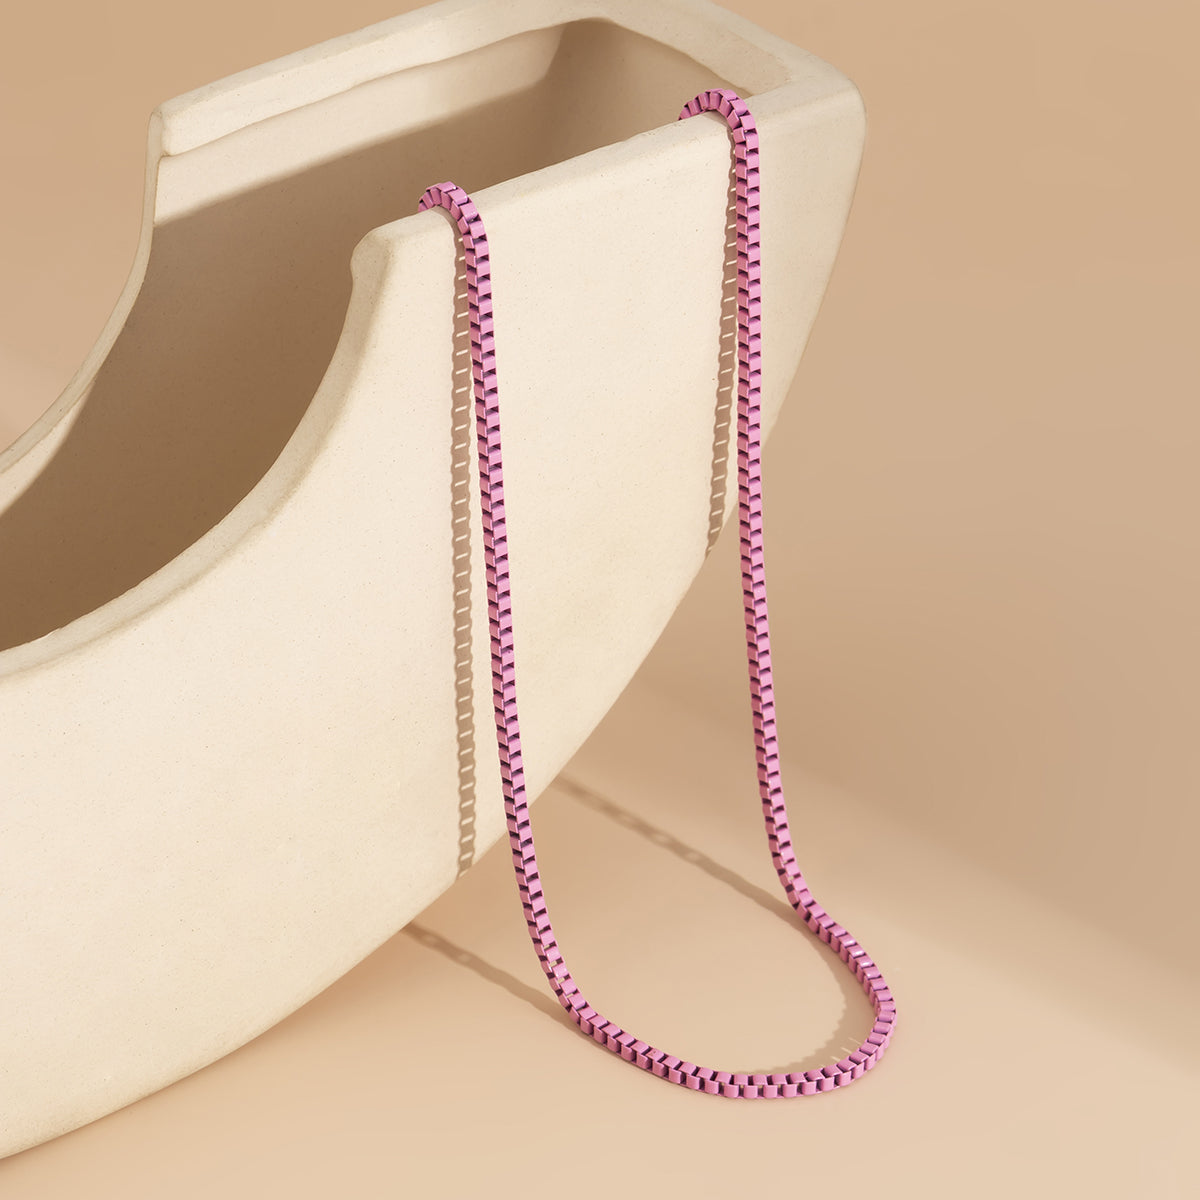 Pink Enamel & Silver-Plated Box Chain Necklace